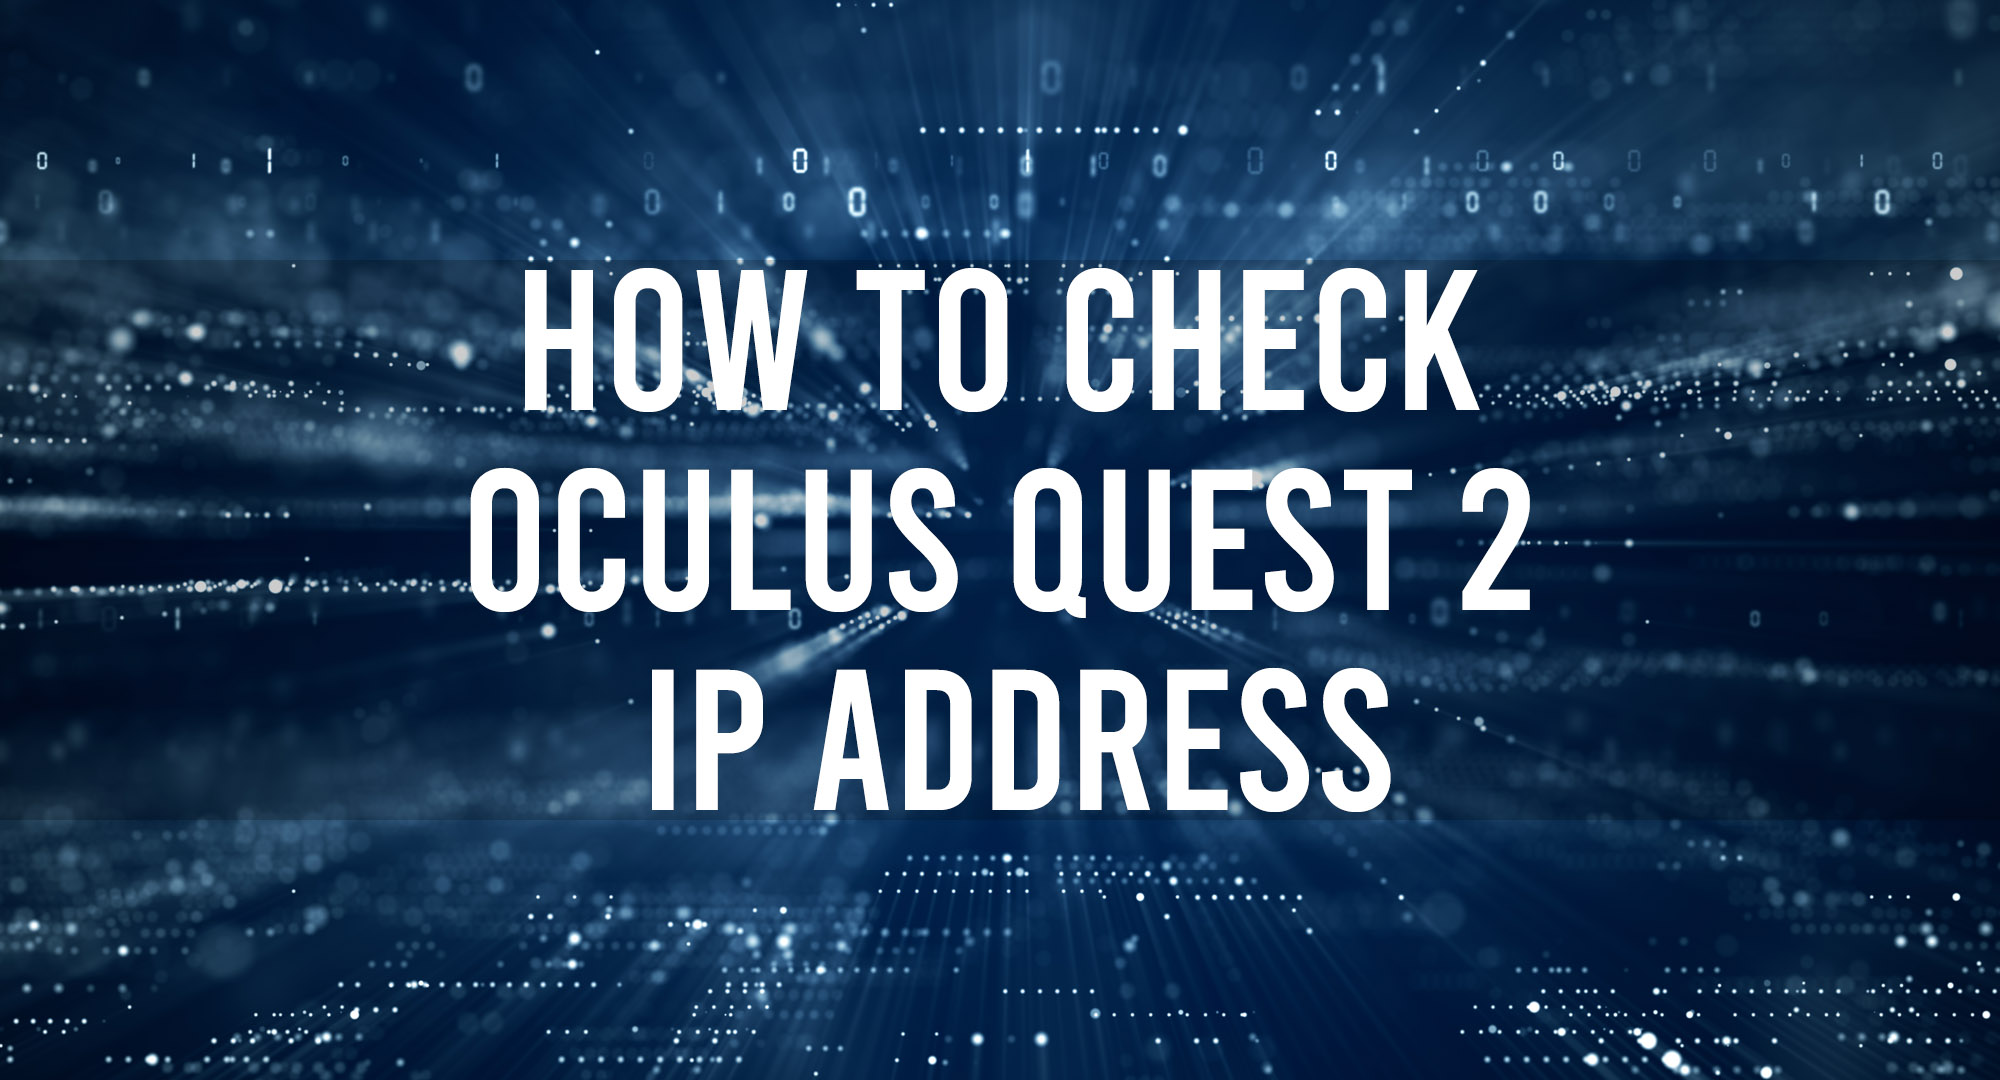 How to check Oculus Quest 2 IP address